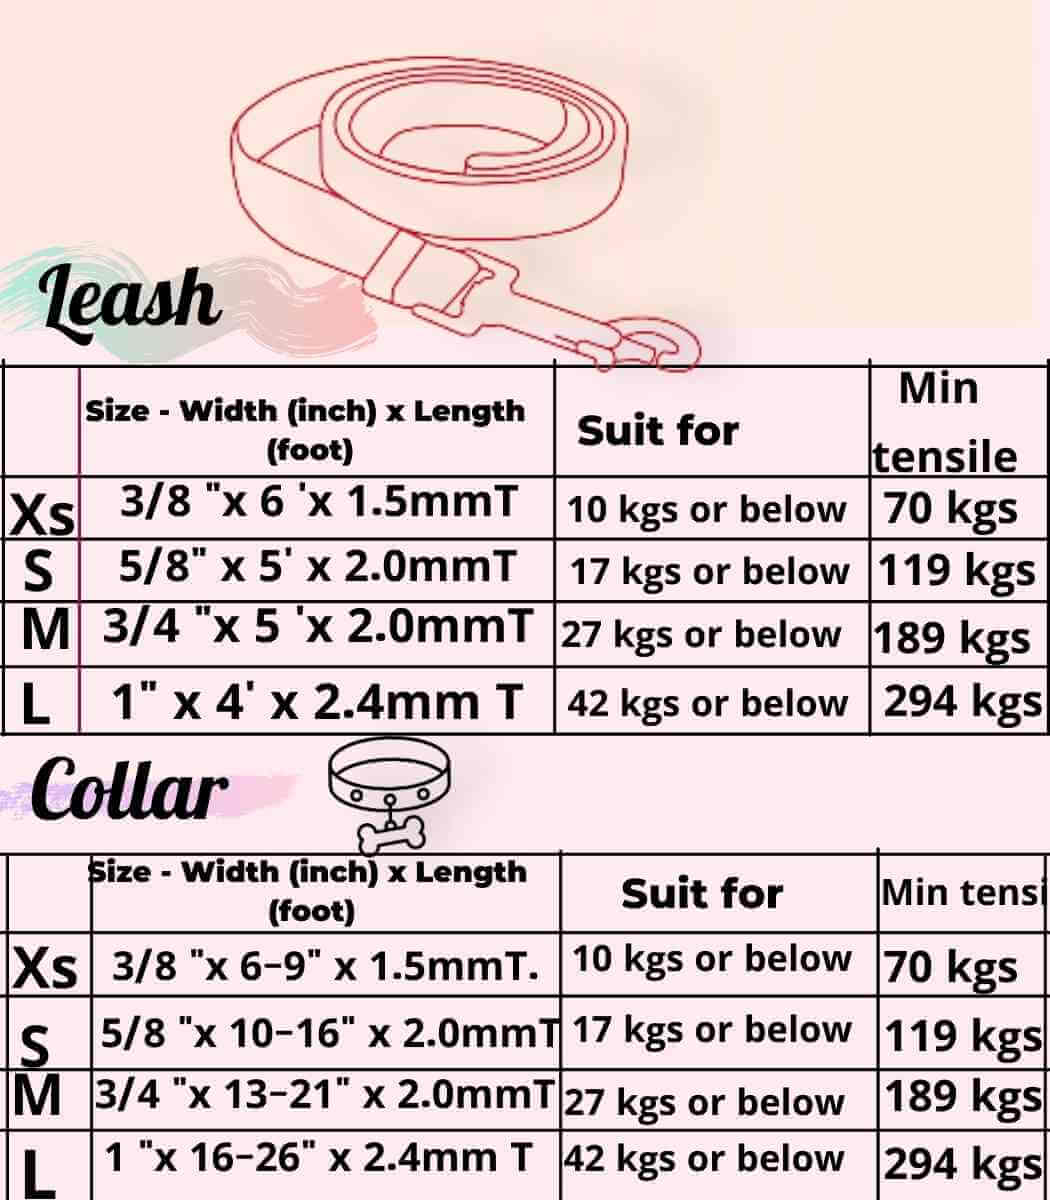 What Length Should I Choose for My Dog's Leash